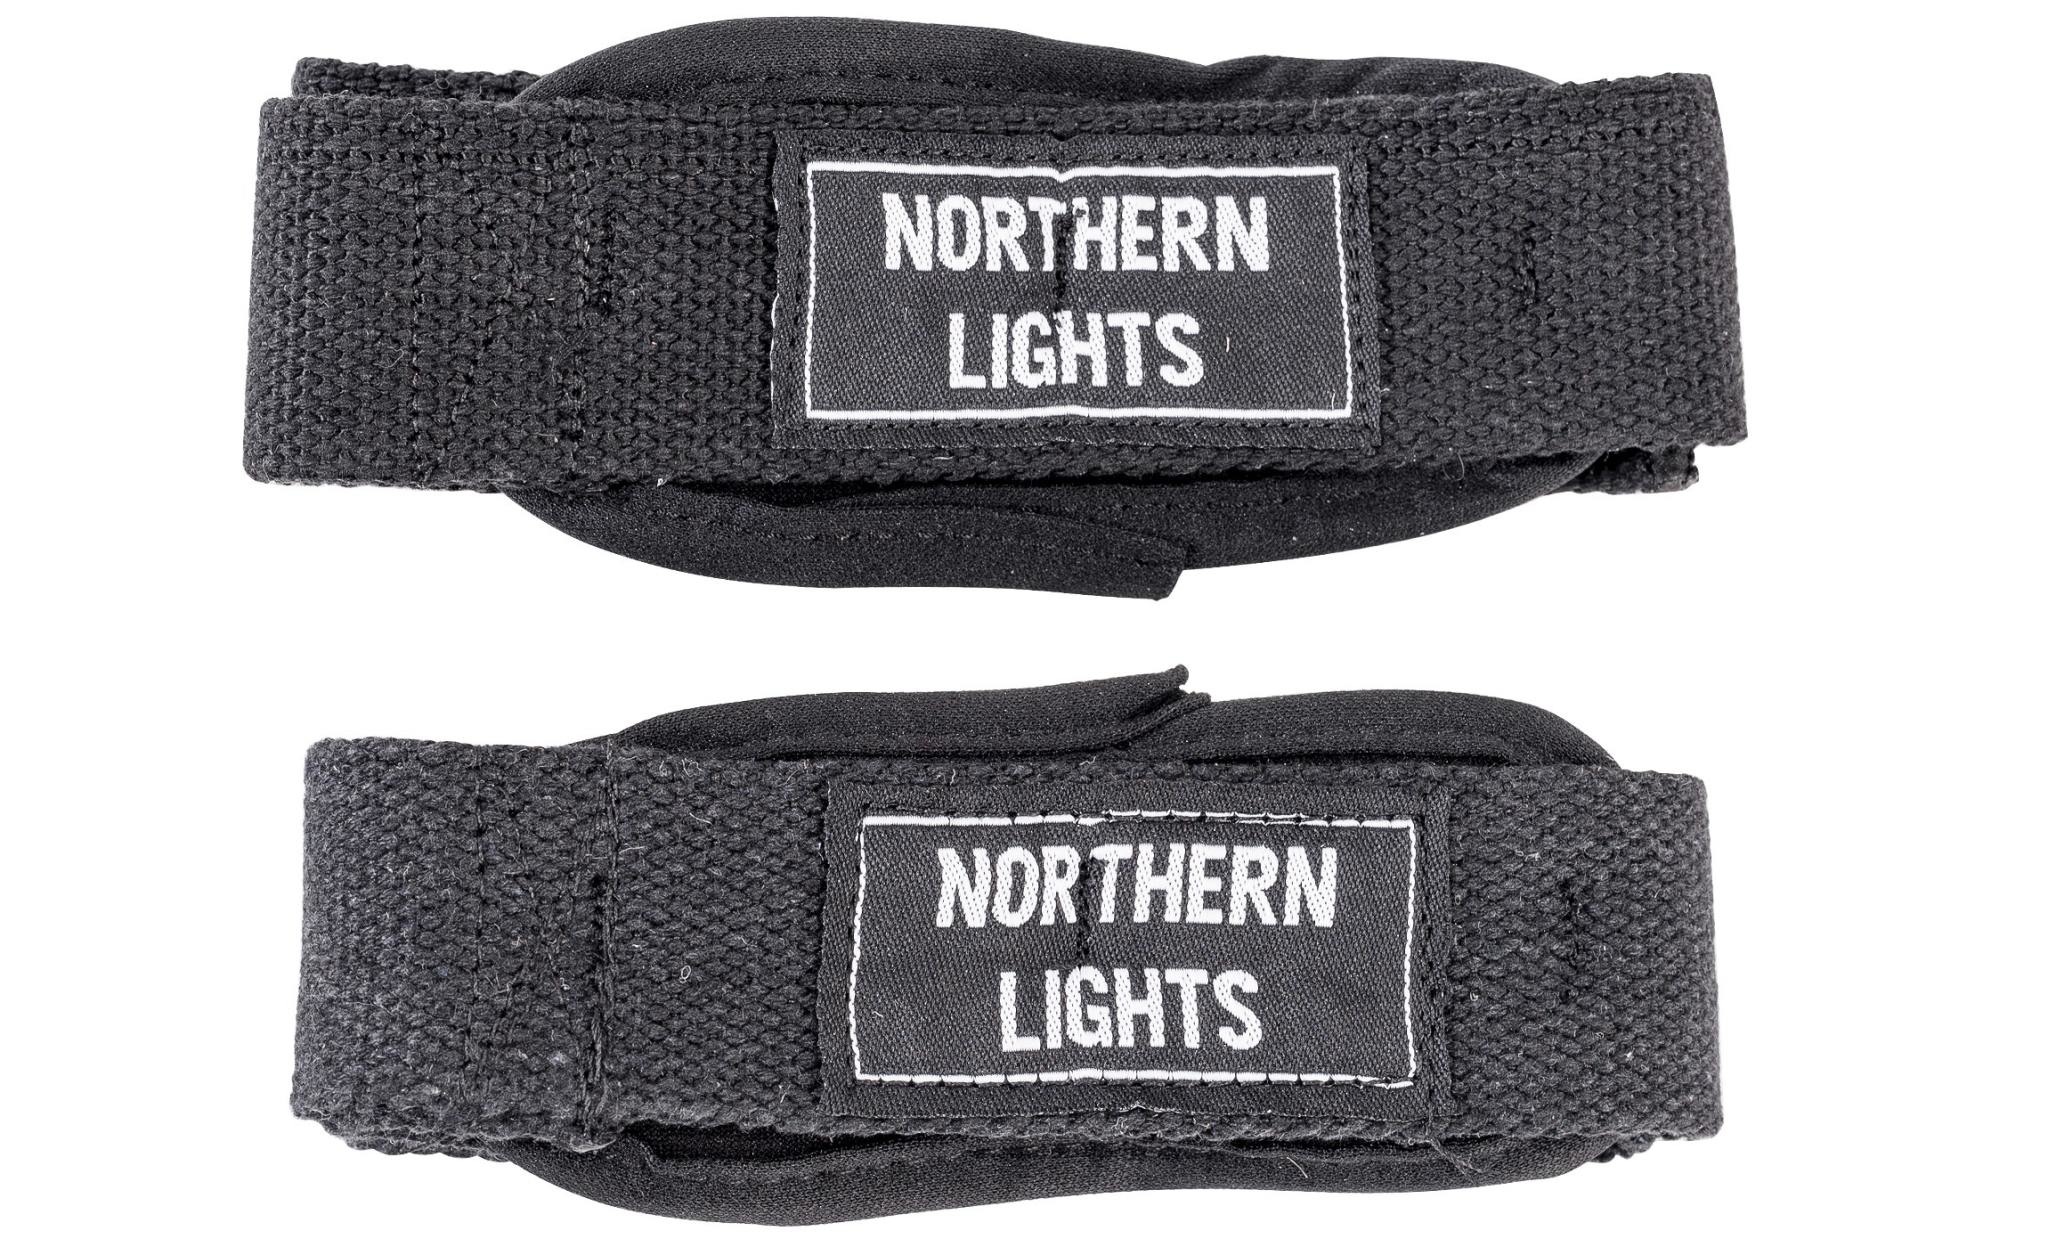 Northern Lights Cotton Lifting Straps - Pair